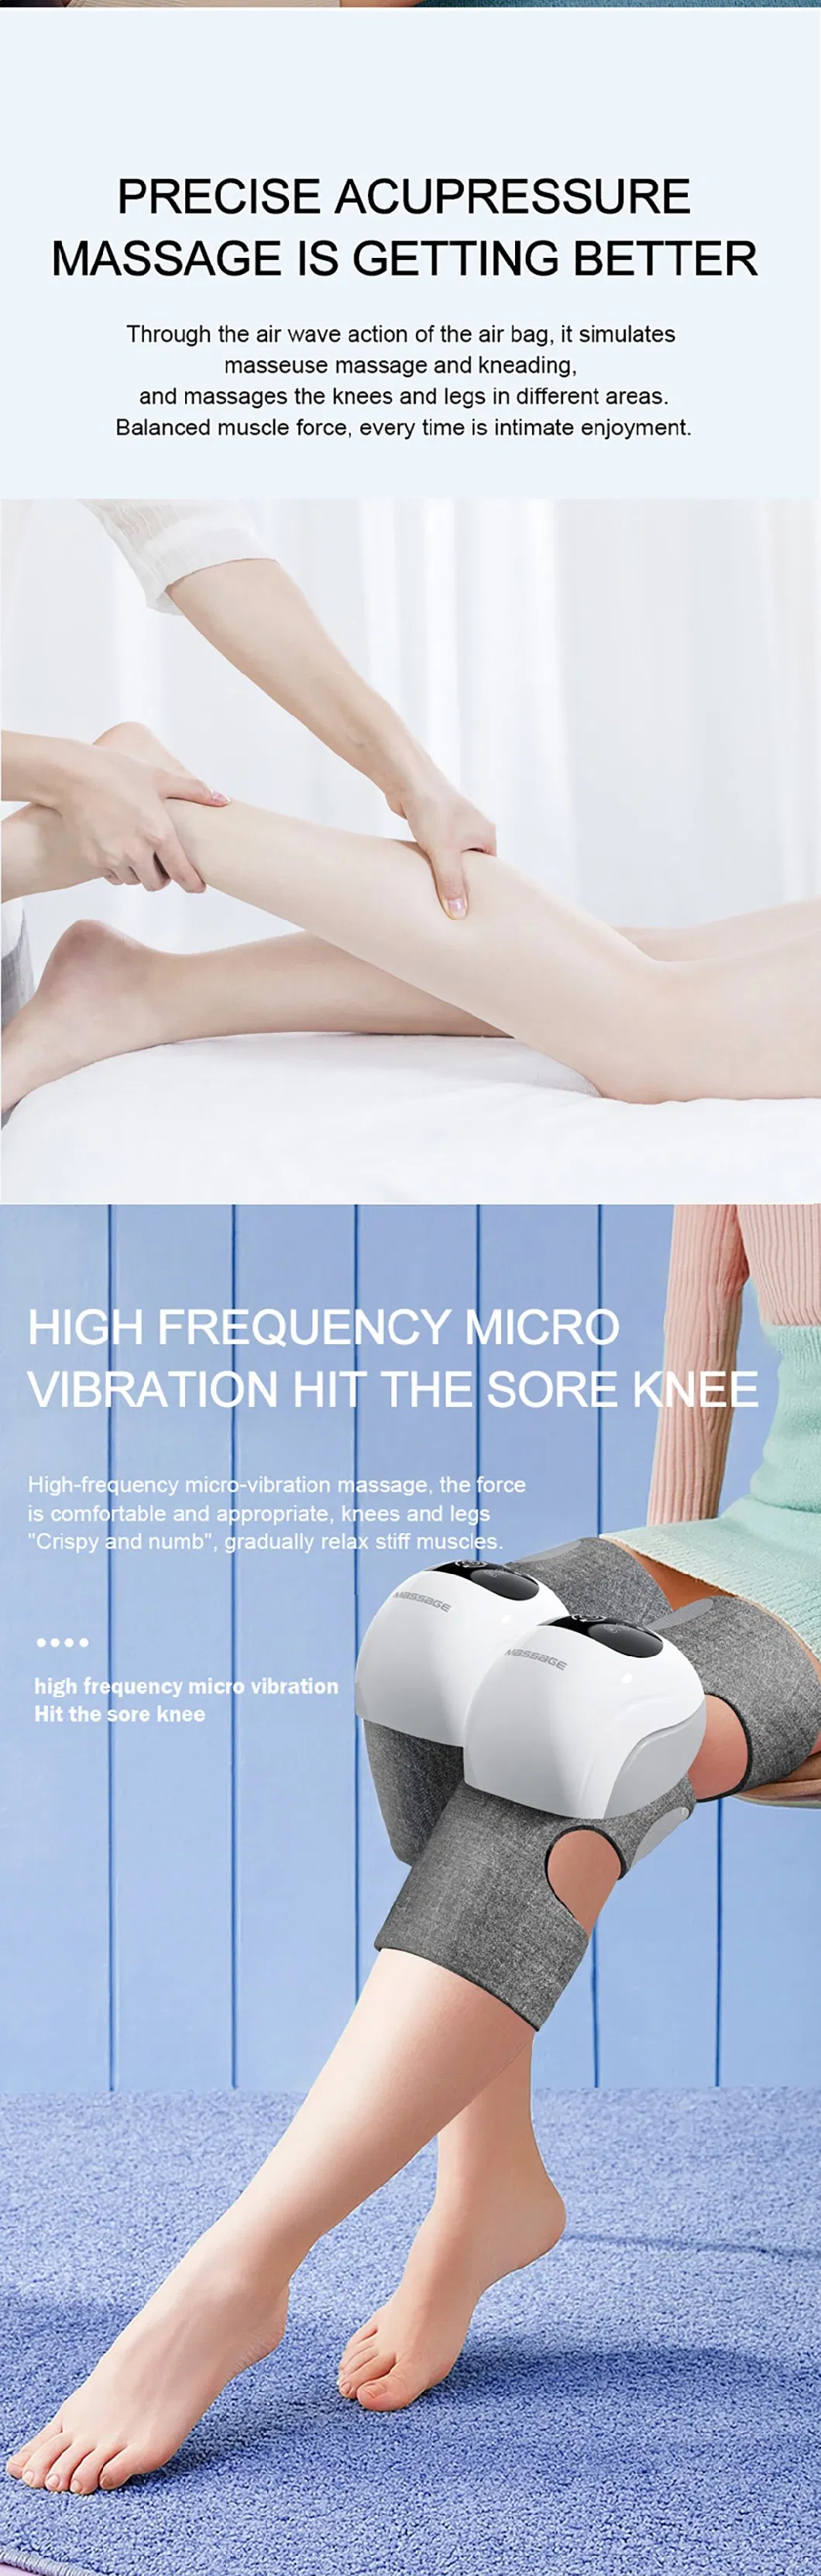 Electric LED Leg Laser Therapy Pain Relieve Arthritis Knee Joint Treatment Smart Compress Knee Massager Machine with Heat